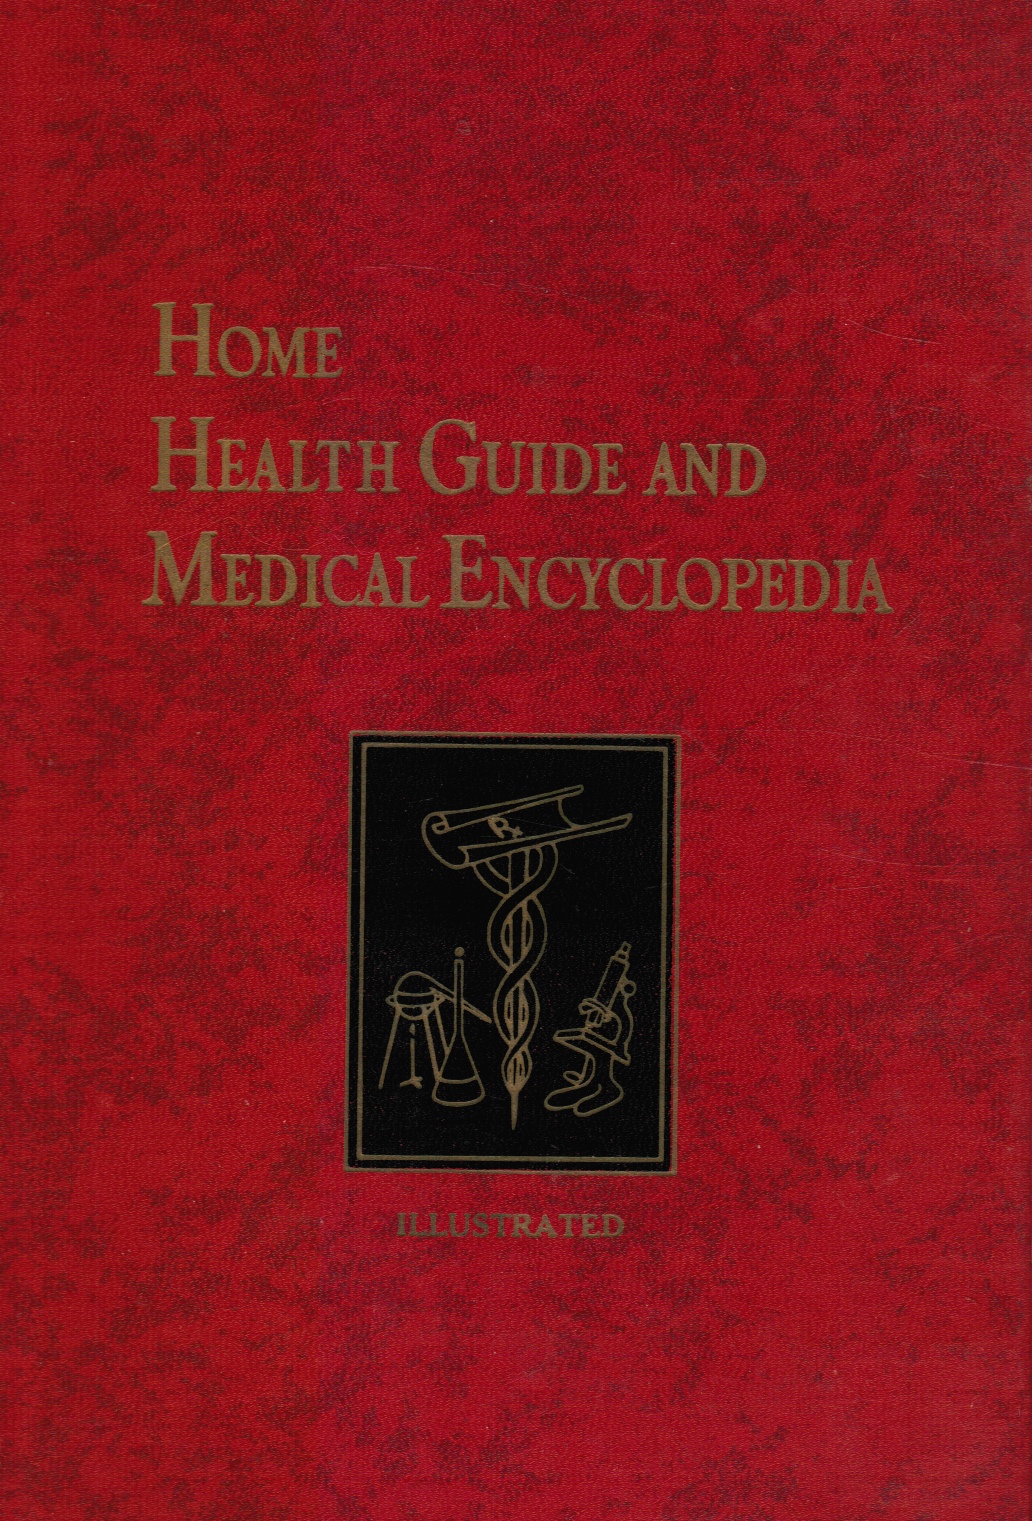 BROWN, ETHAN ALLAN (EDITOR) AND VARIOUS PHYSICIANS - Home Health Guide and Medical Encyclopedia